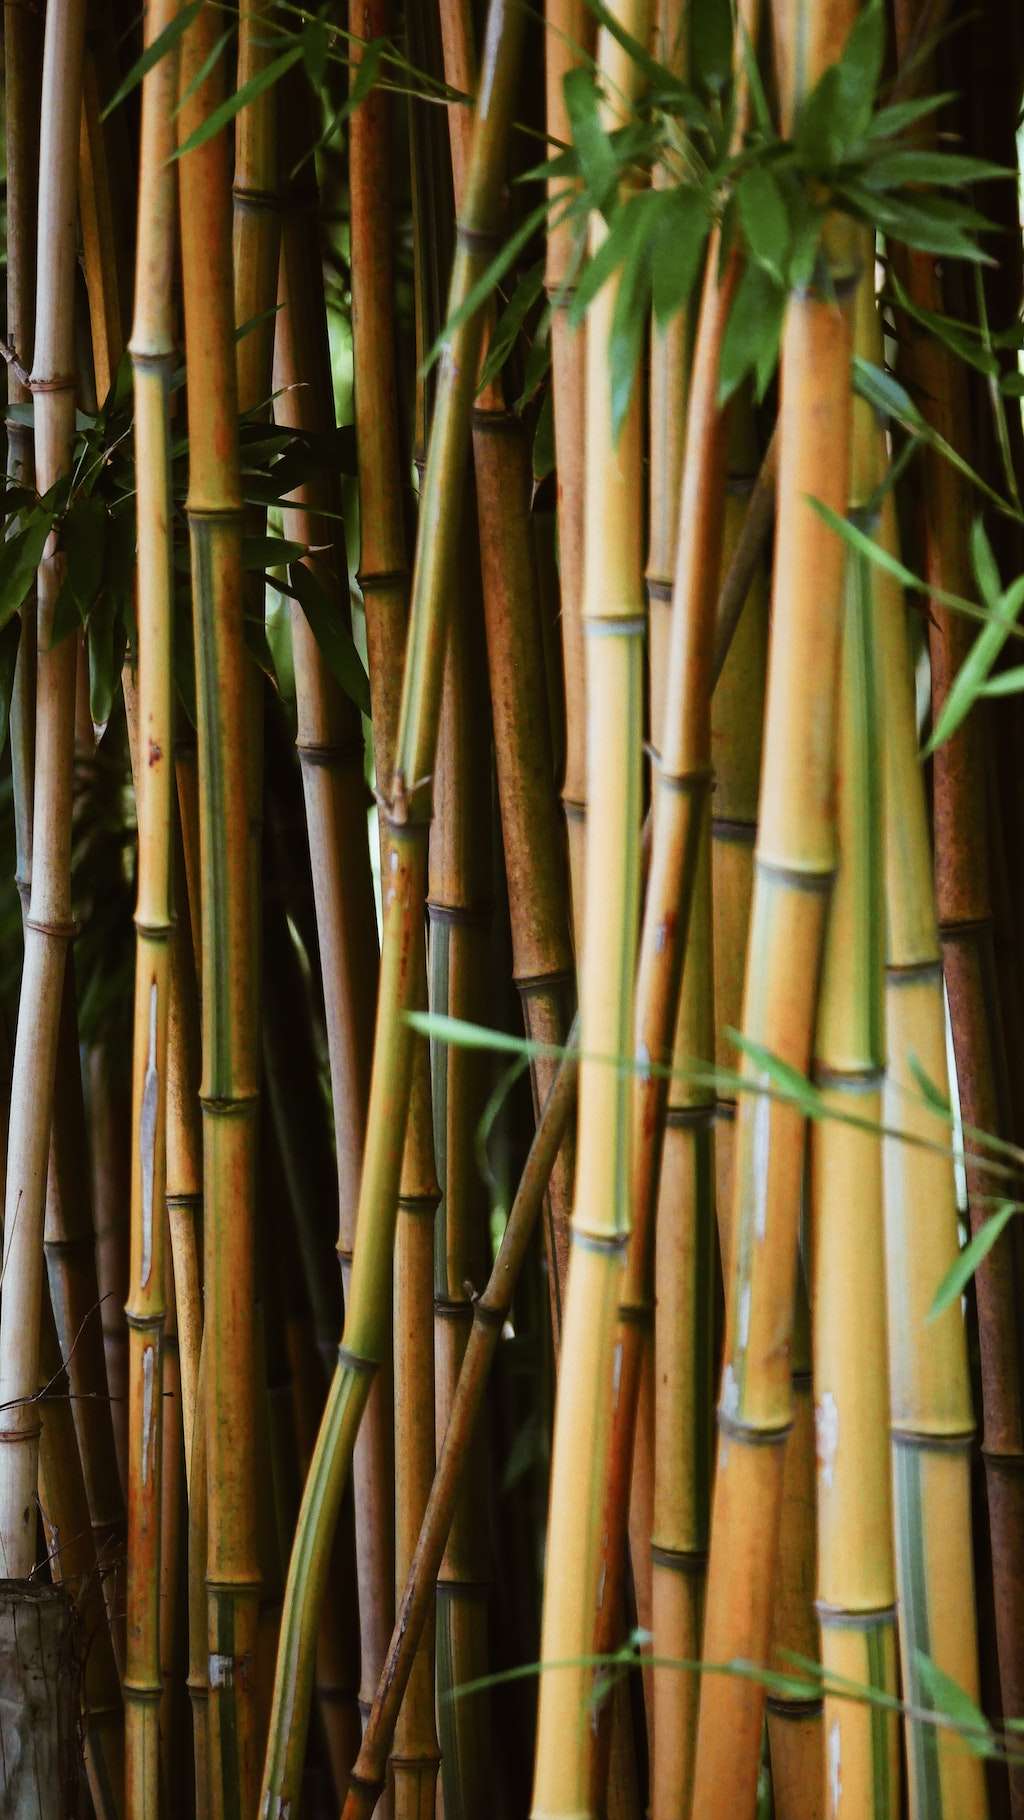 Bamboo forests support China's pandas and the bamboo fabric industry 